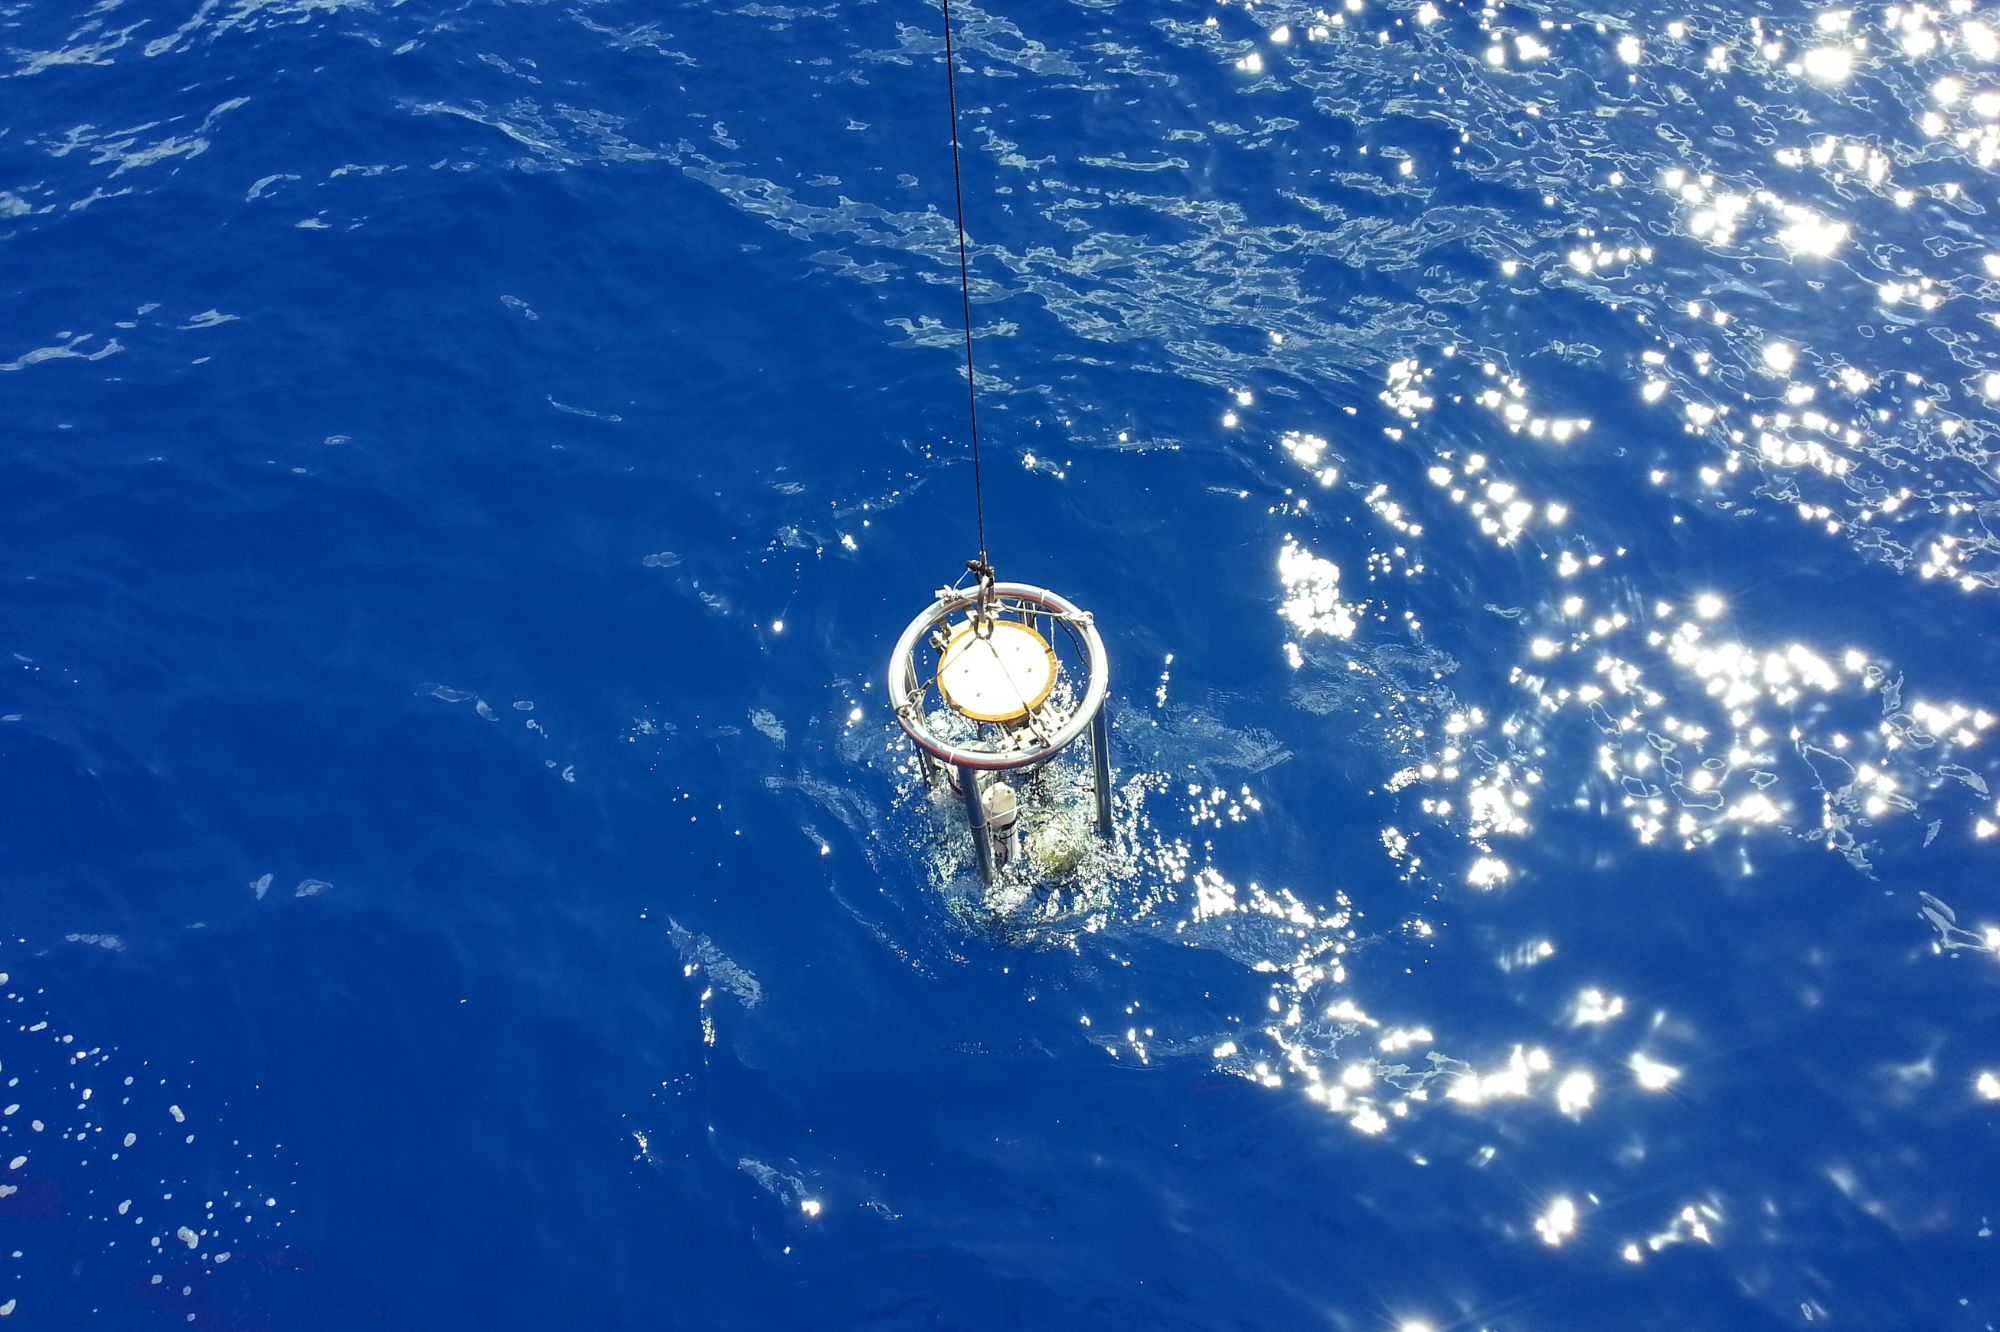 Secchi disk being lowered into sea